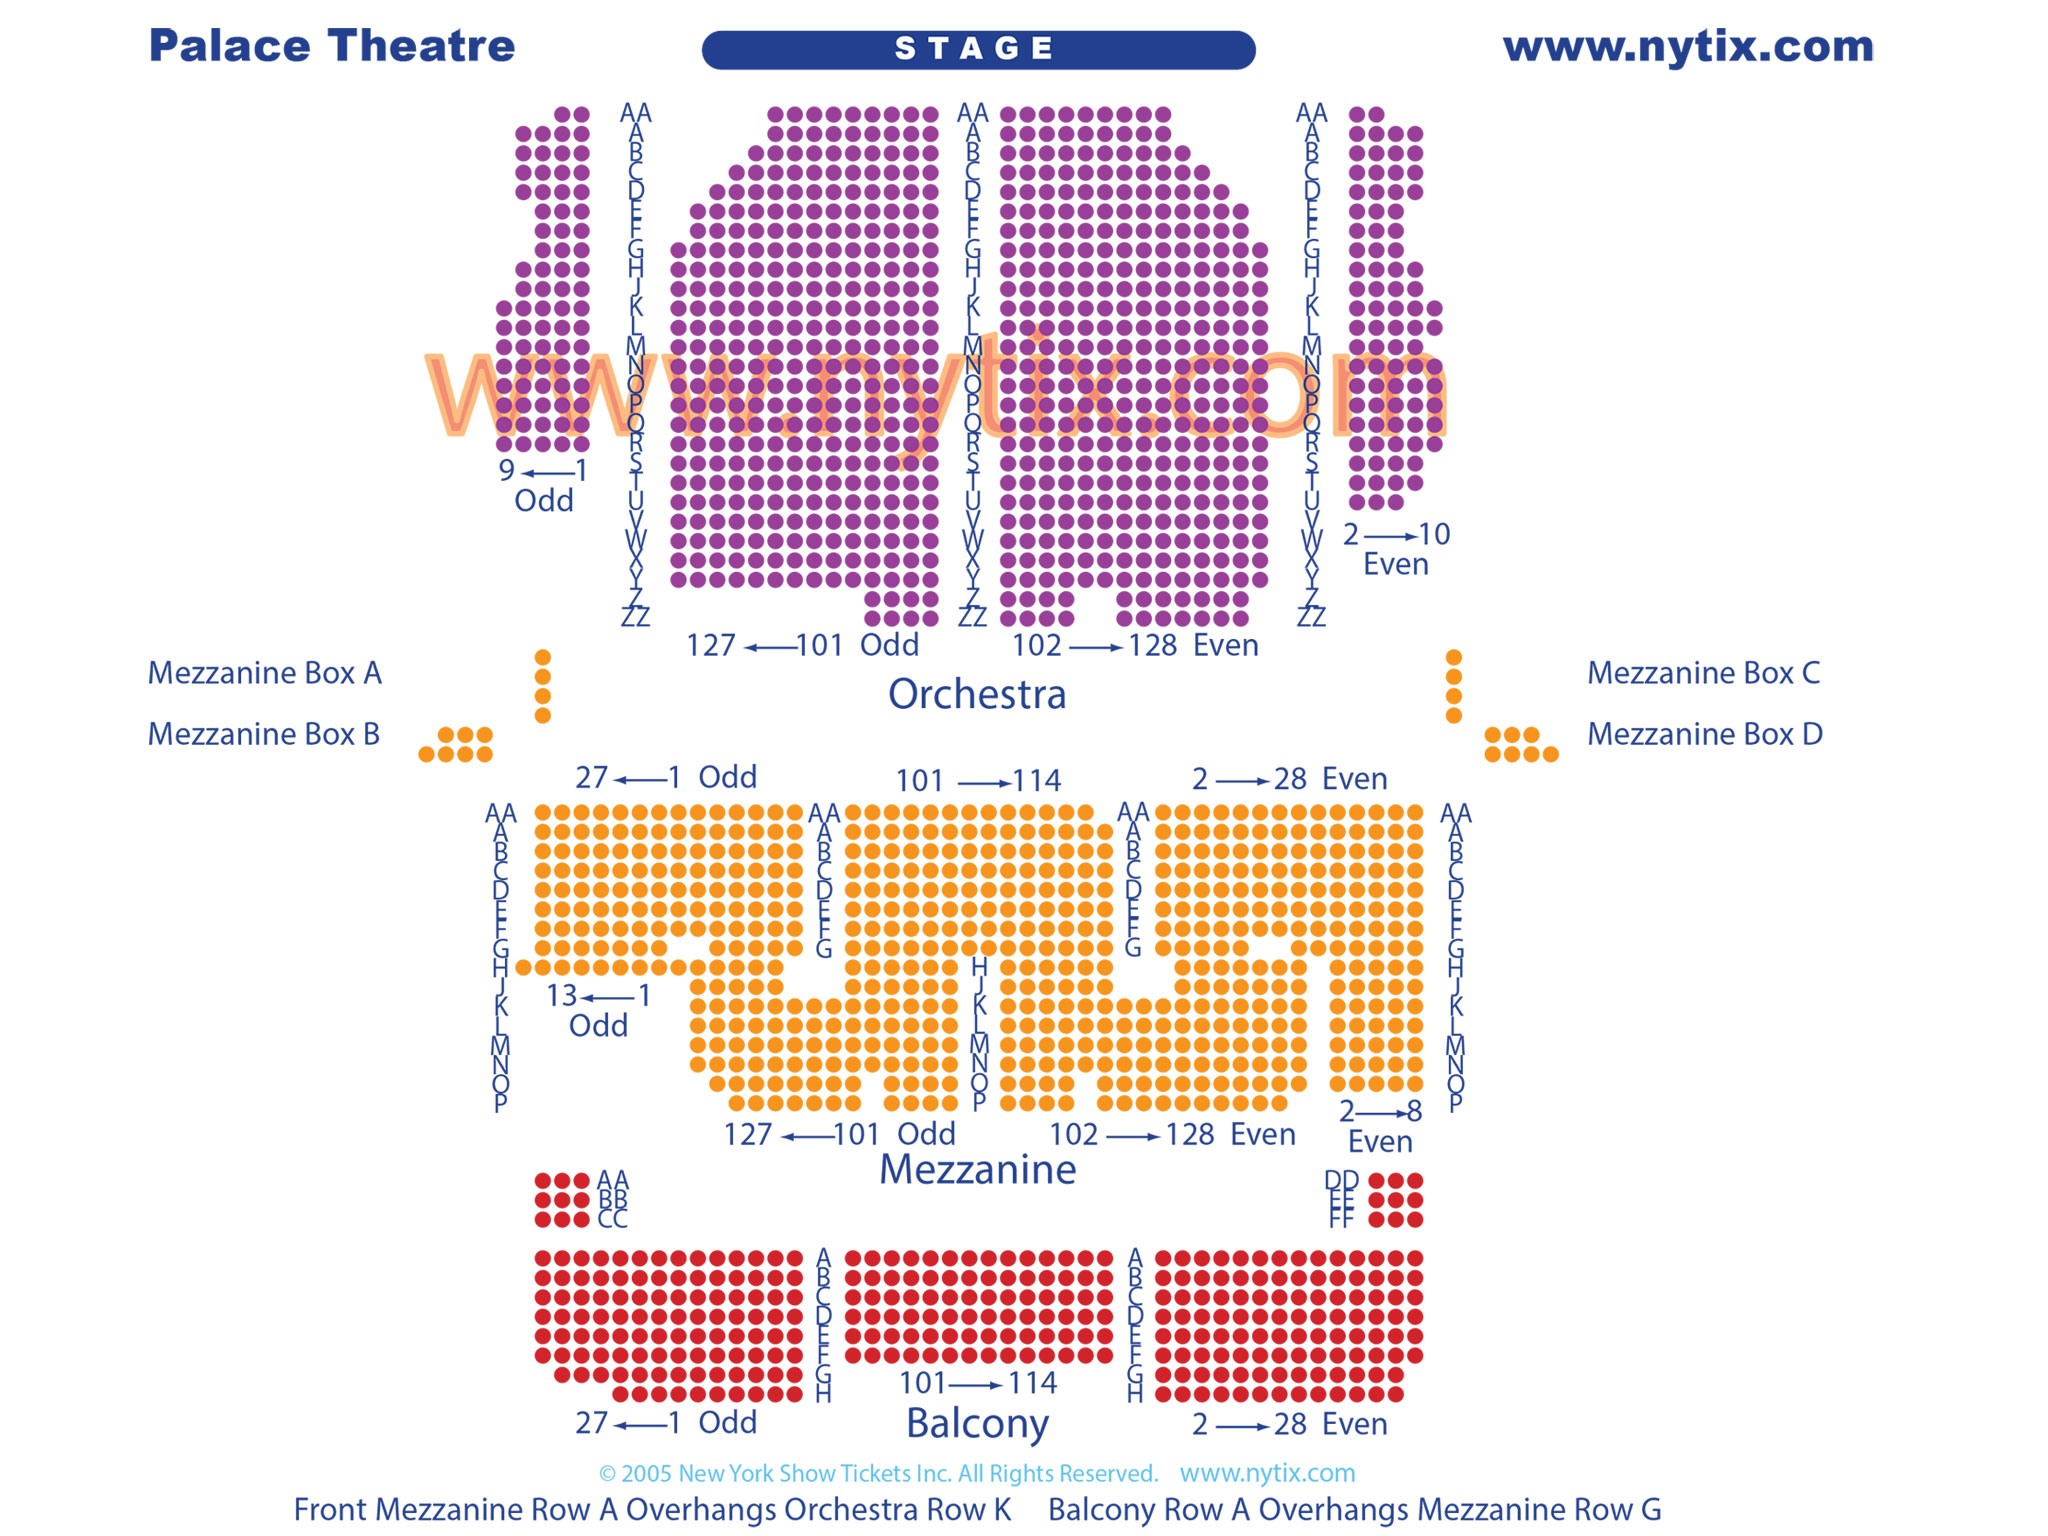 Palace Theatre Seating Chart